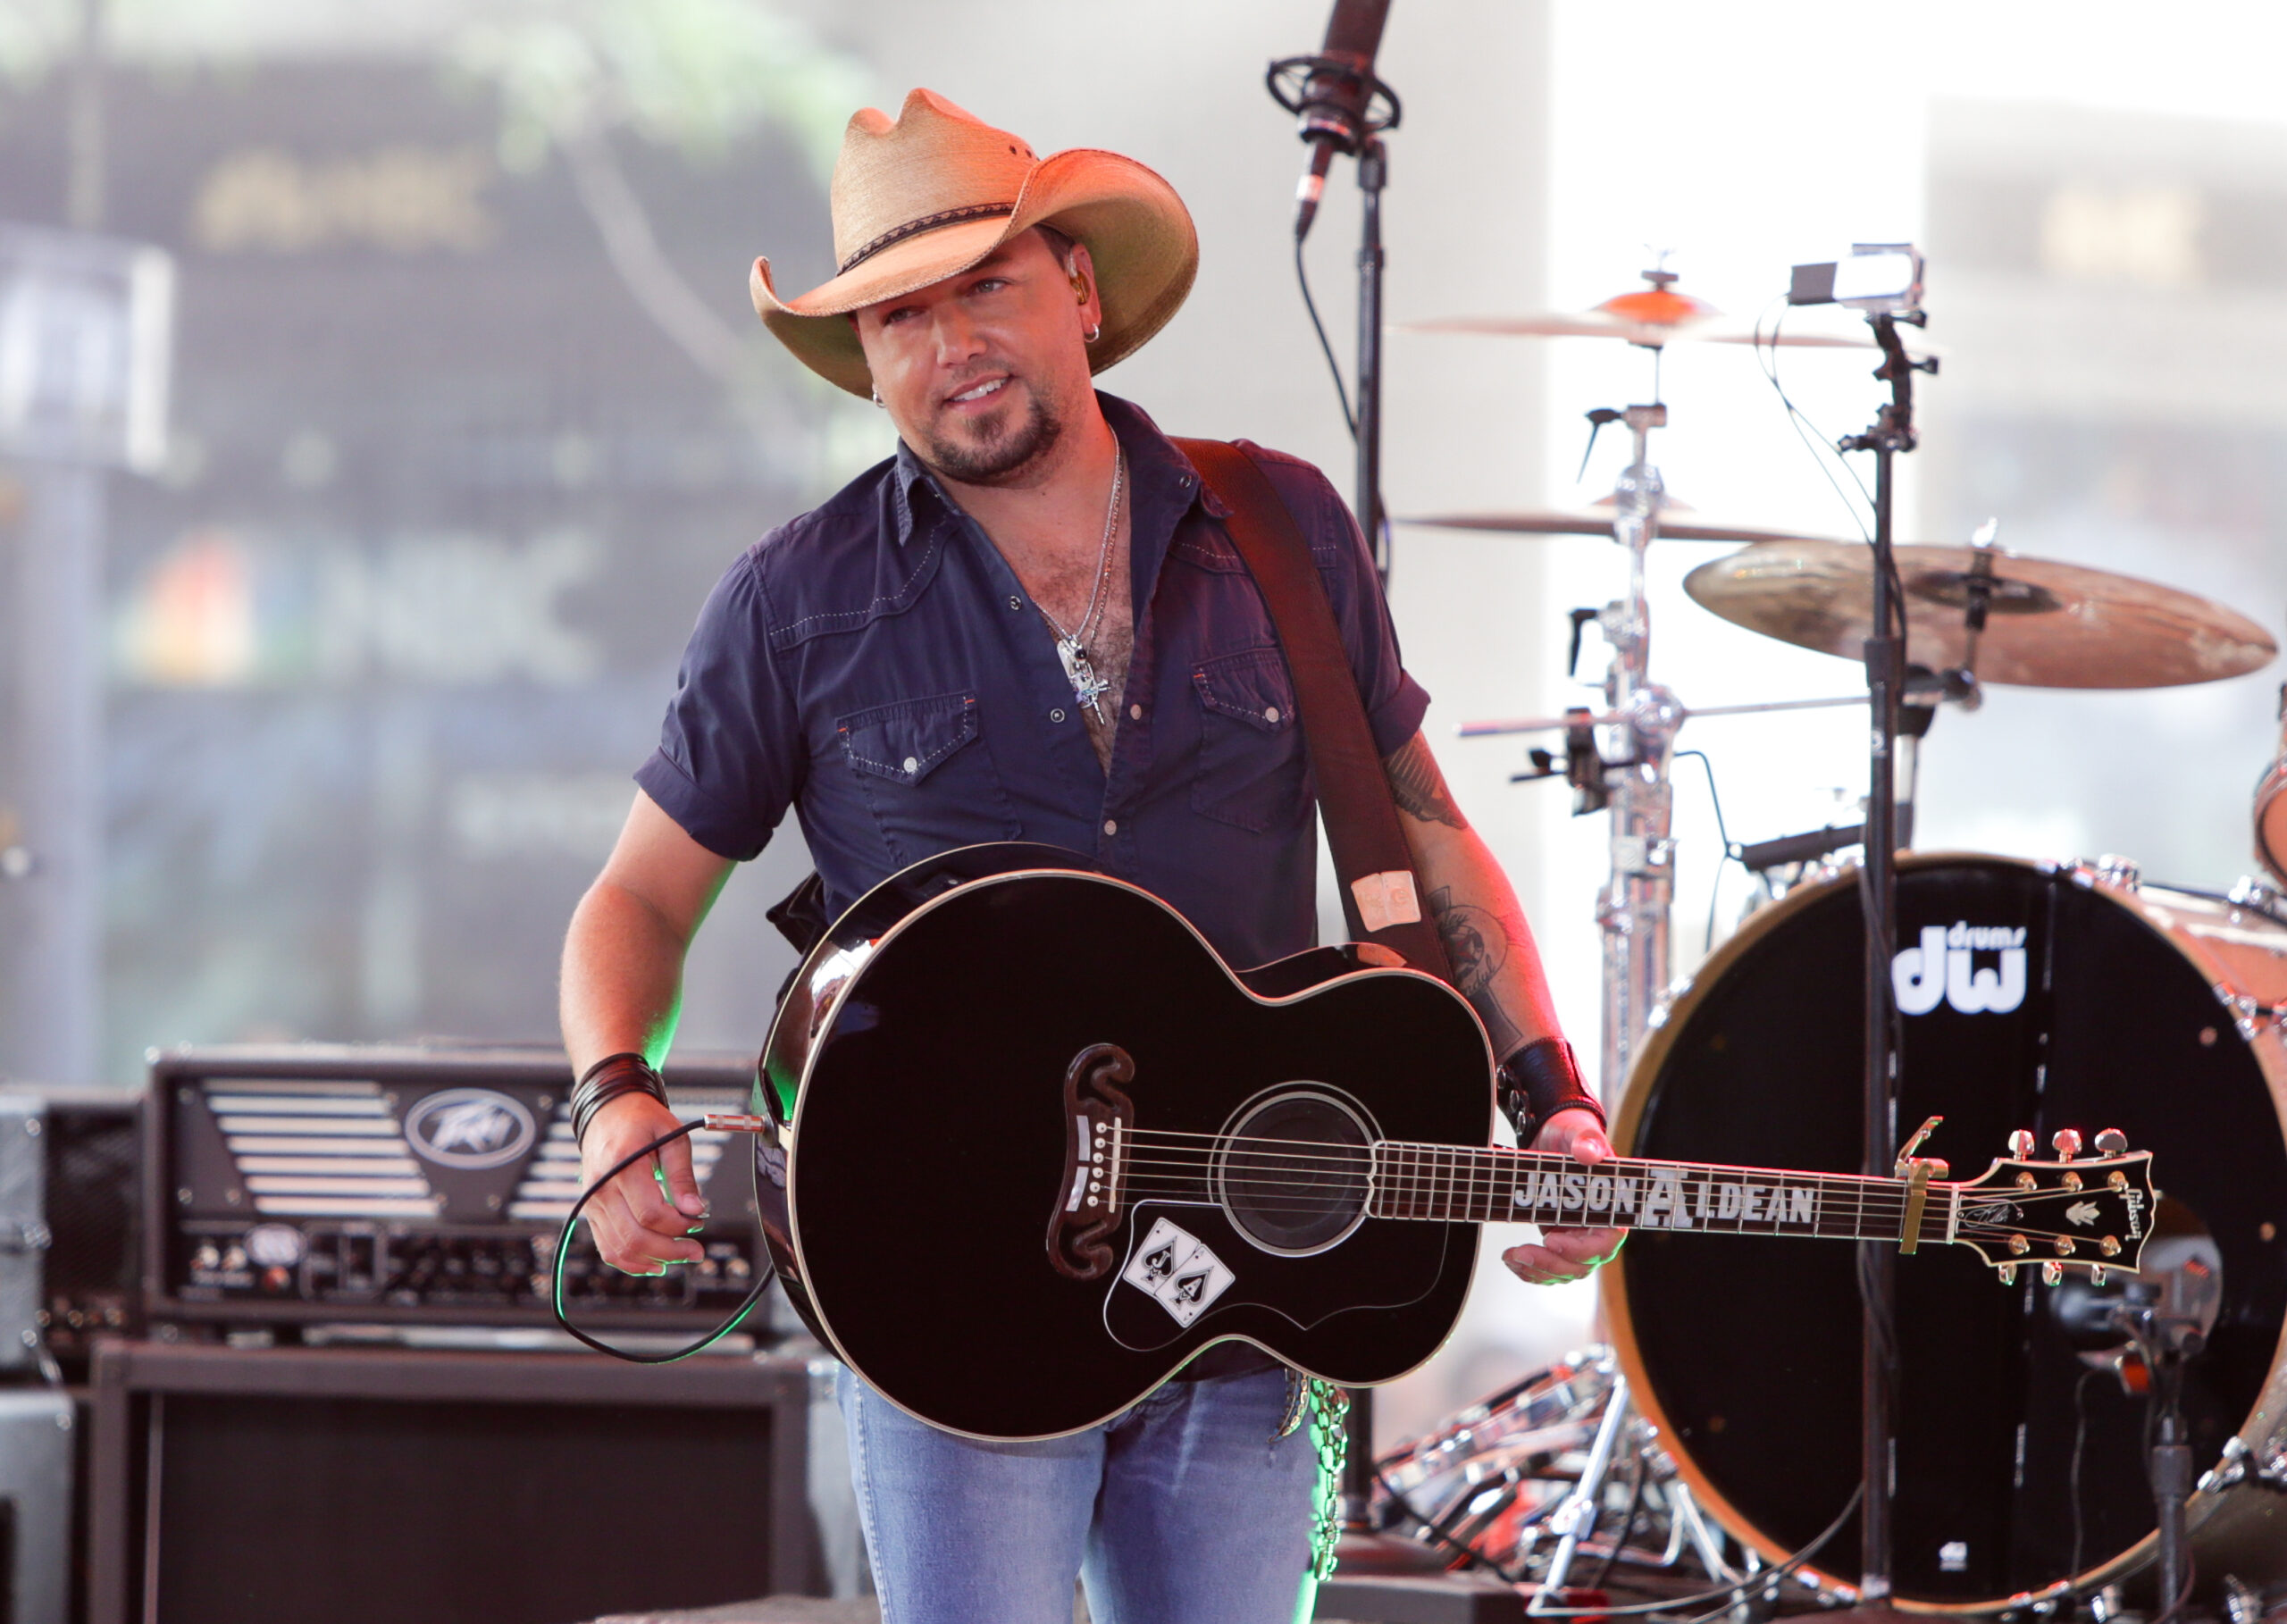 Jason Aldean Suffers Heat-Related Emergency During Concert